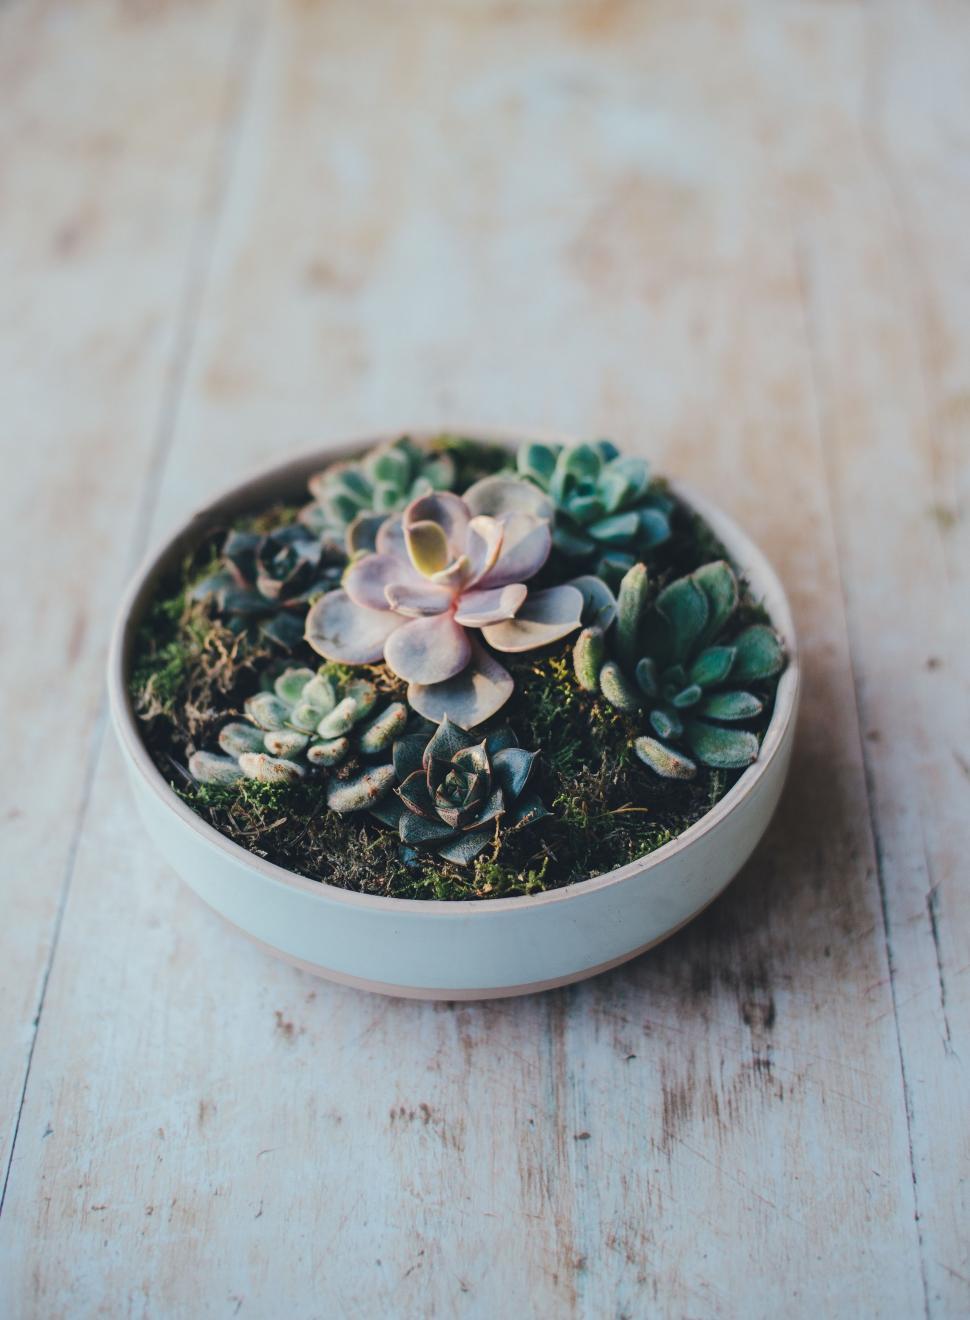 Free Image of Small White Bowl Filled With Plants on Wooden Table 